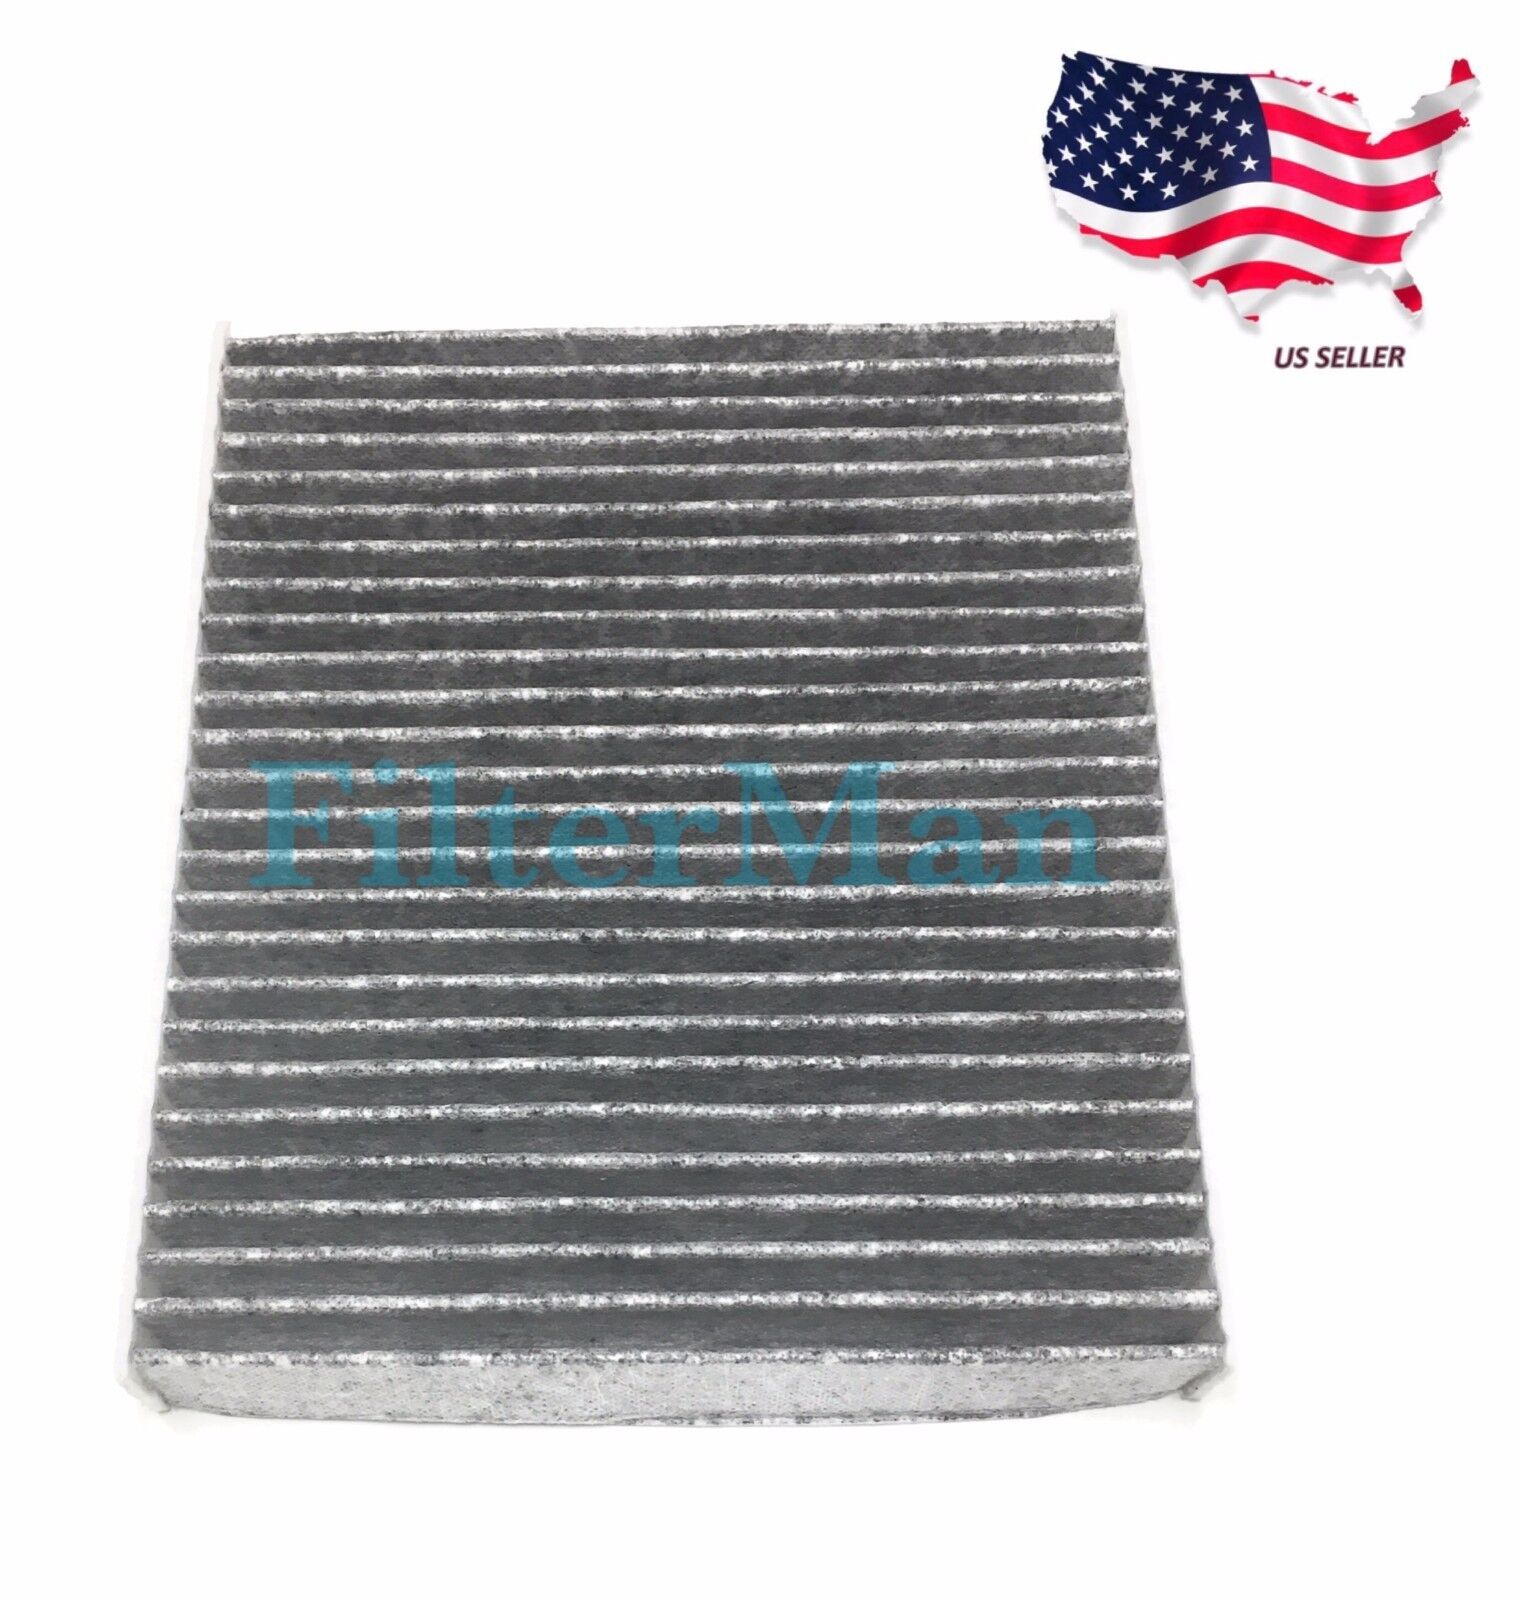 CARBONIZED CABIN AIR FILTER FOR CHEVY IMPALA CADILLLAC XTS C38224